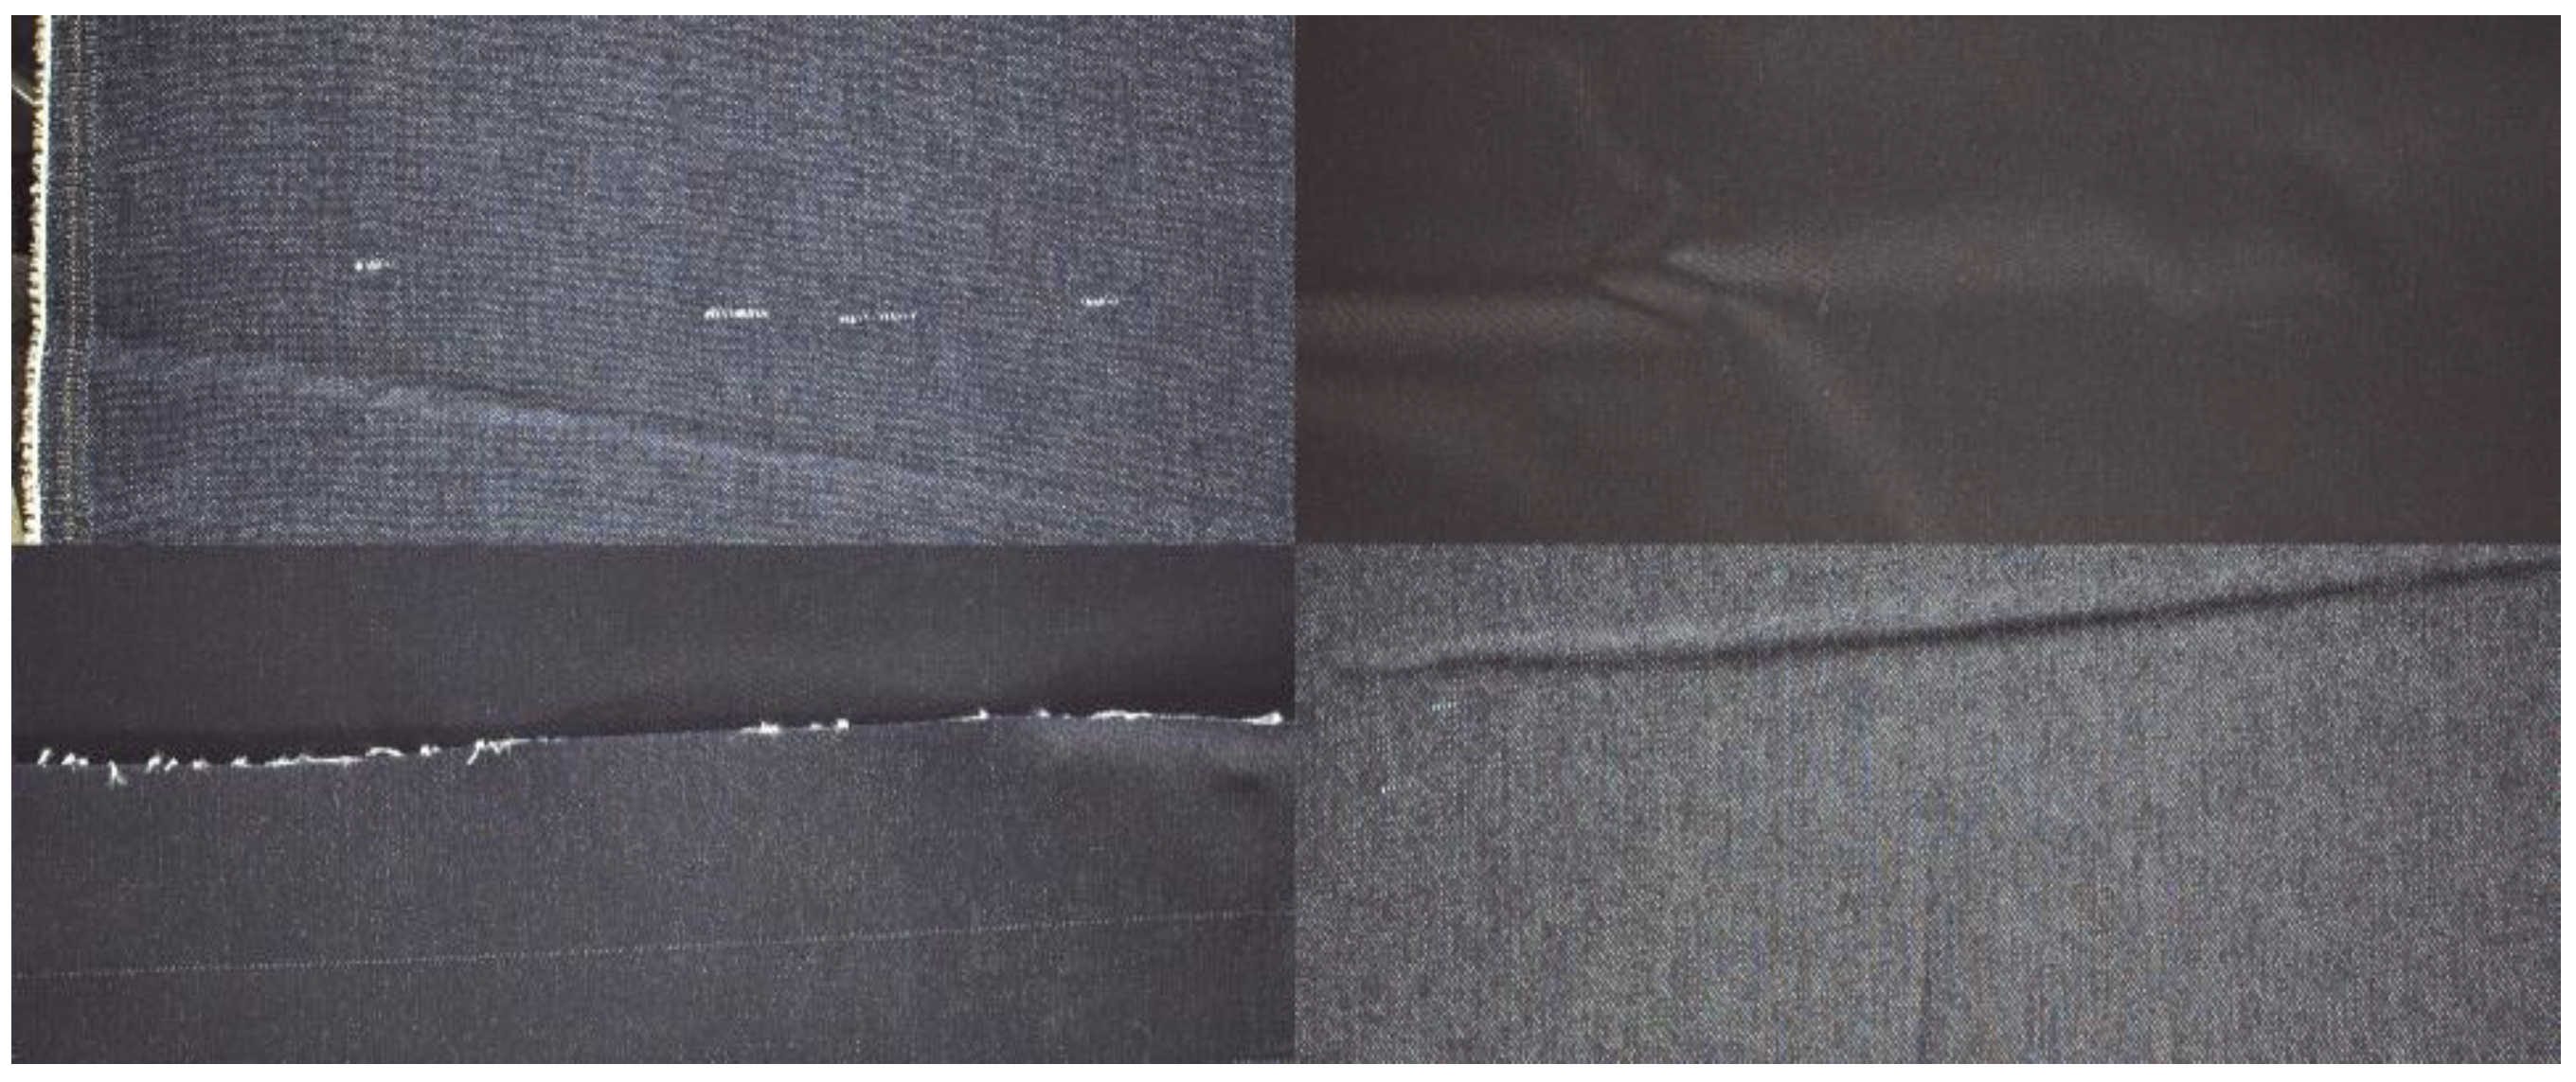 Defects List of Knitted Fabric